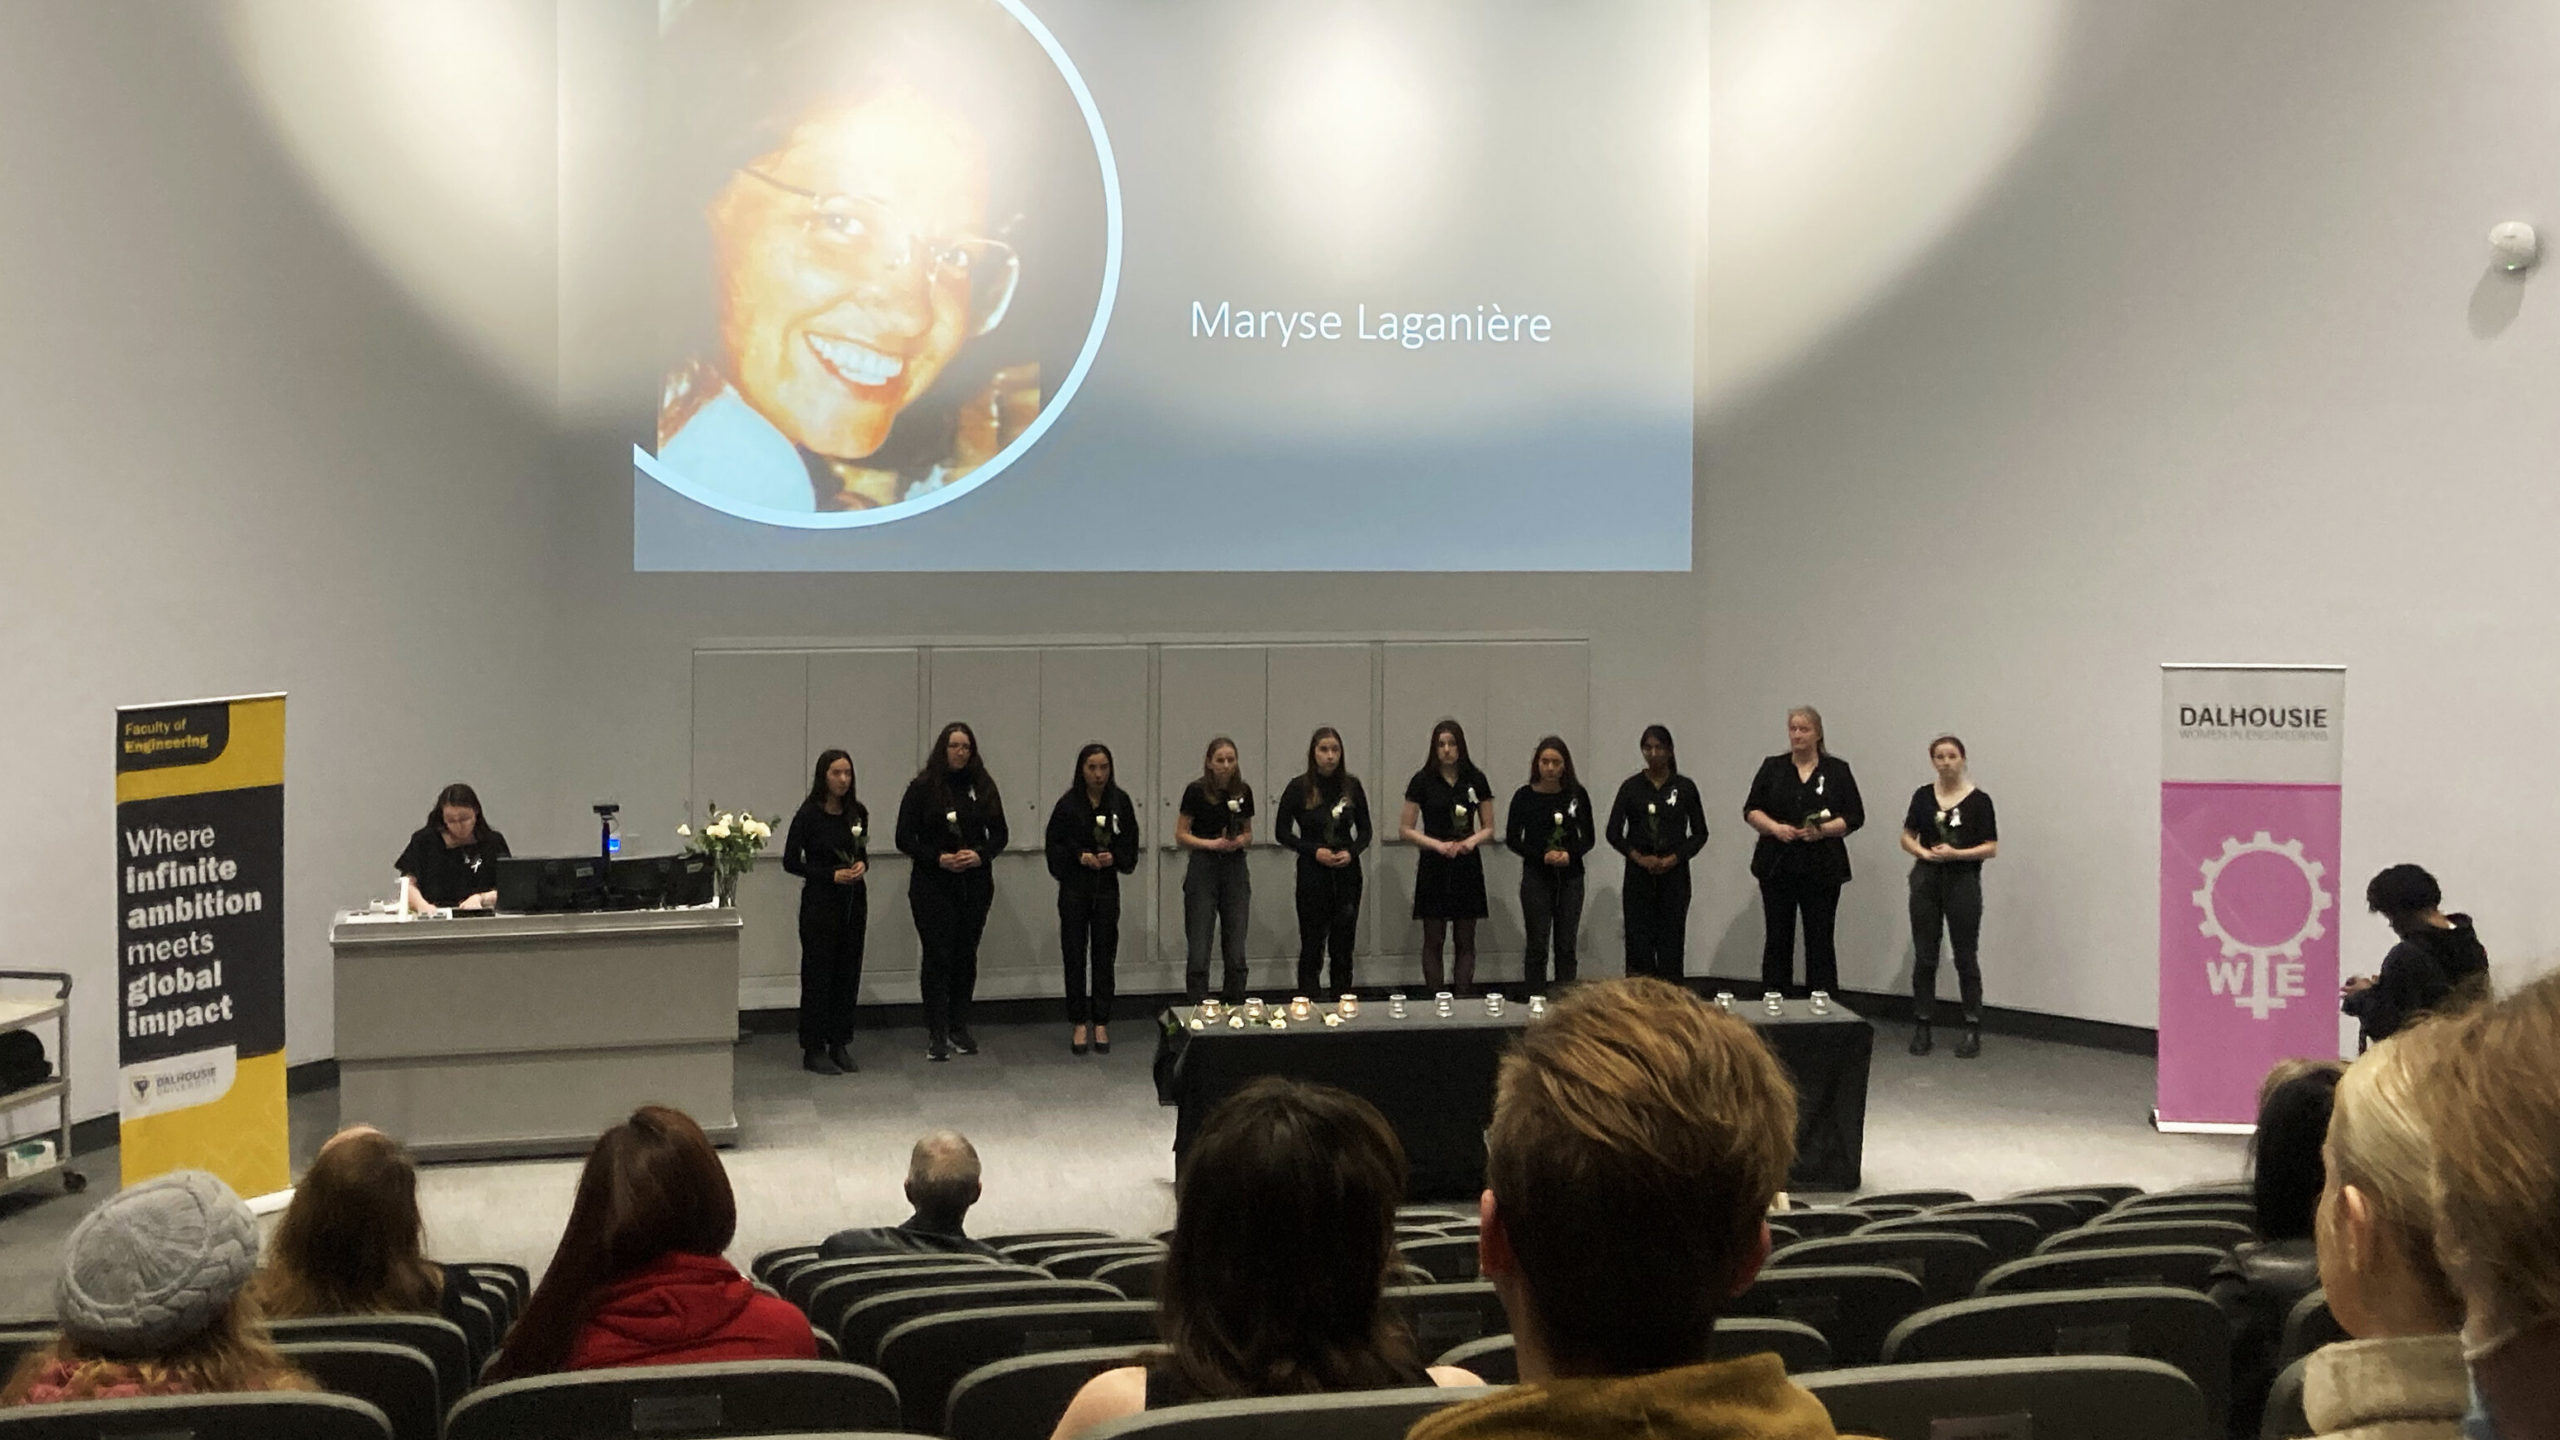 The Dalhousie Women in Engineering Society (DALWIE) hosted their annual remembrance and resilience ceremony for victims of the 1989 Ecole Polytechnique Massacre at Dalhousie’s Richard Murray Design Building Tuesday evening.